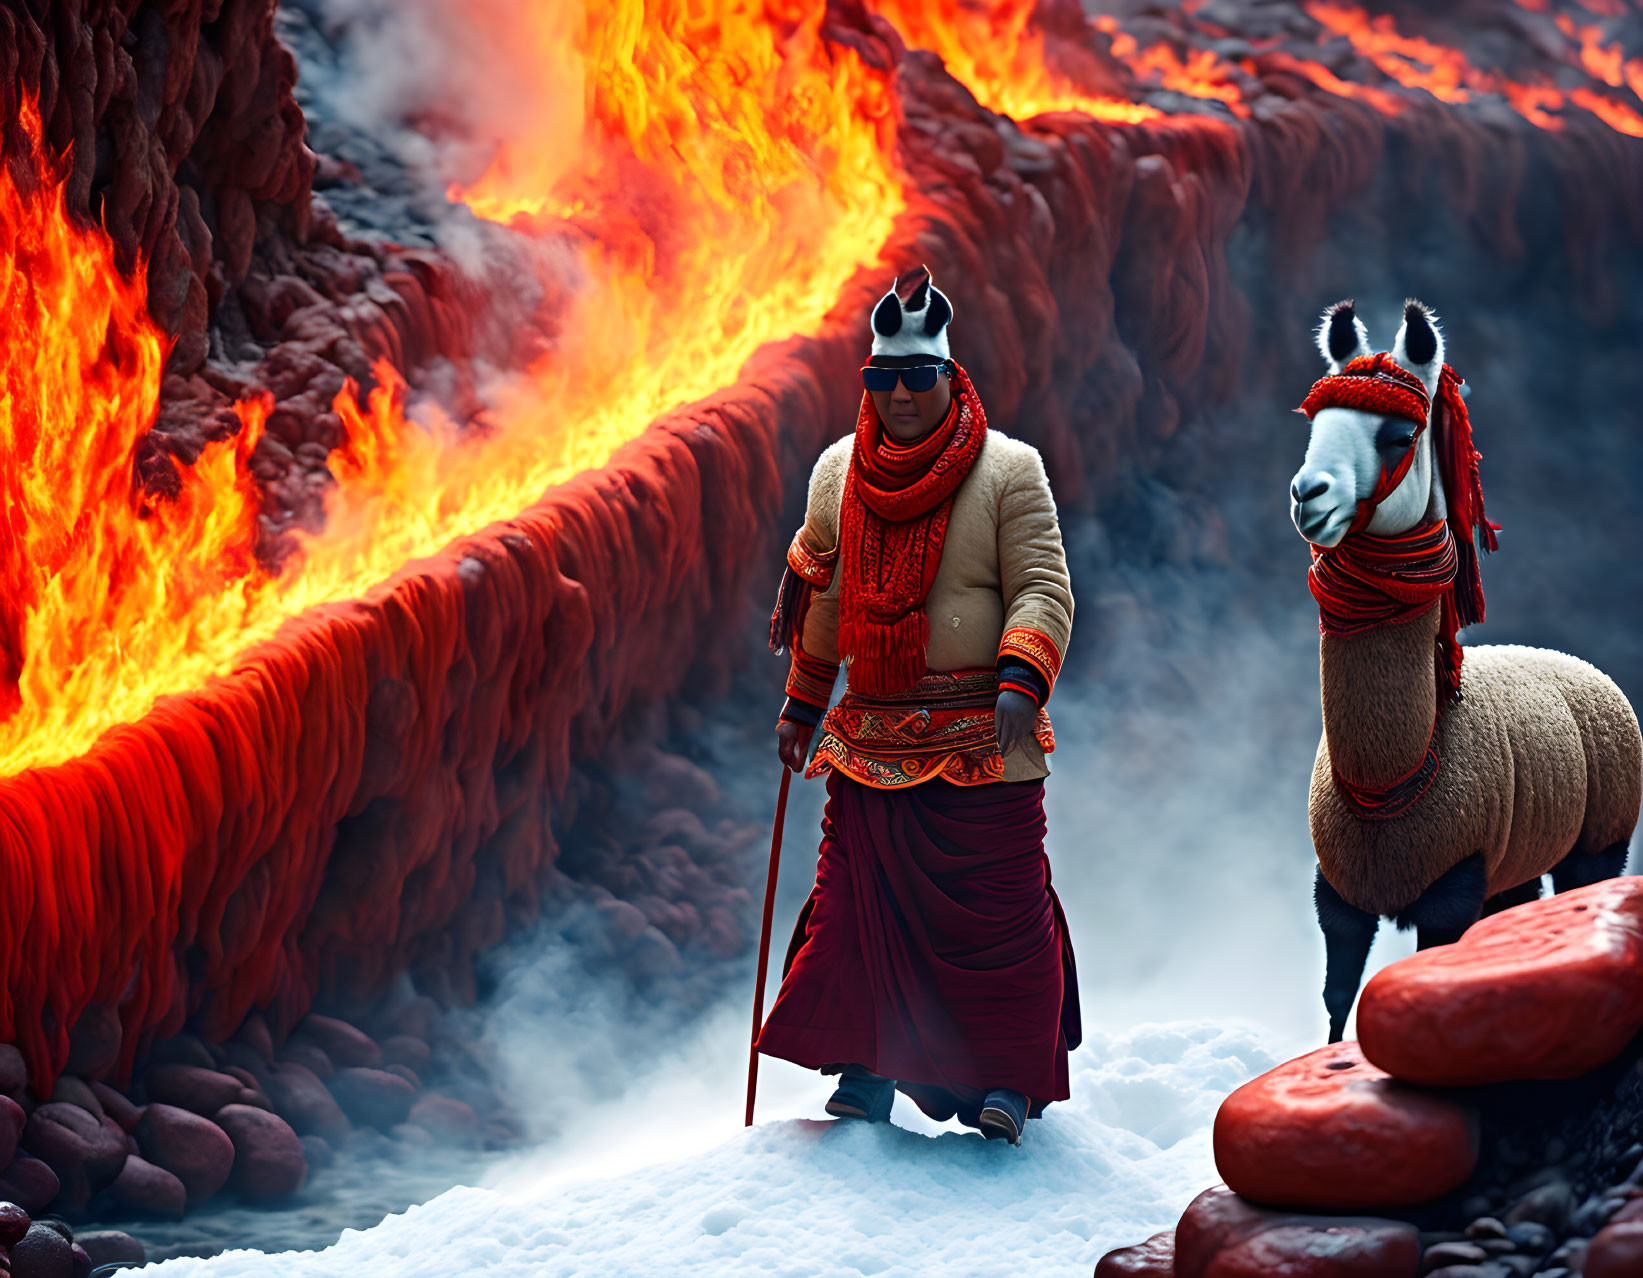 Tibetan lama going to the lava with the llama